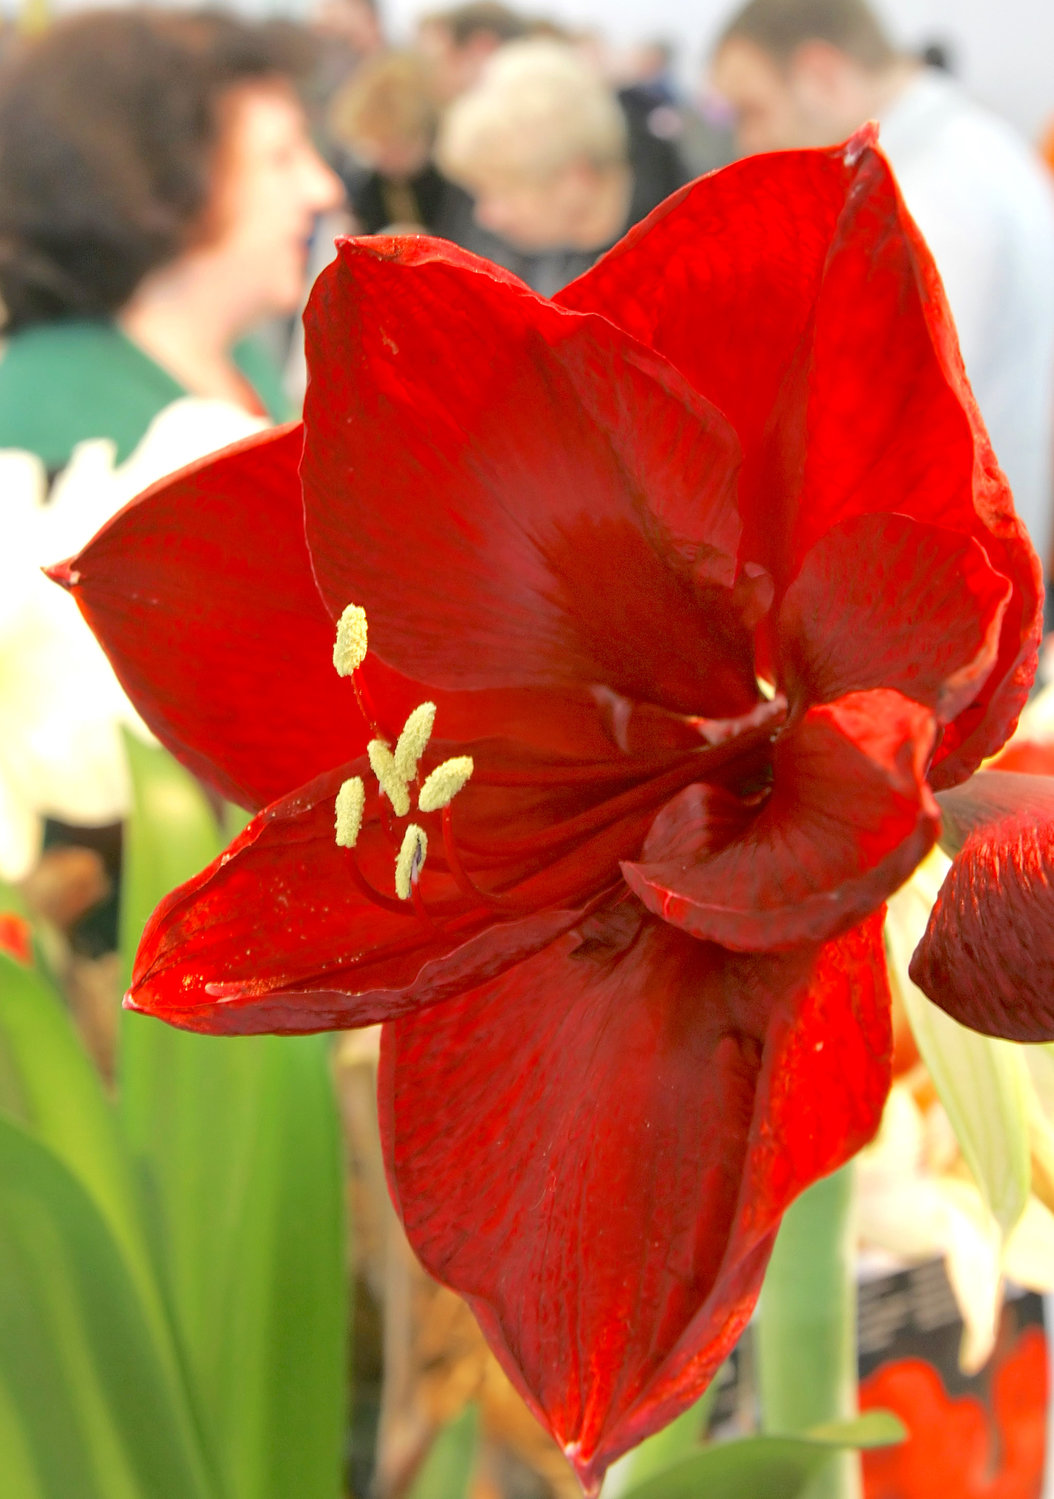 Amaryllis is among the most popular holiday plants can be quite toxic to cats and dogs if ingested.